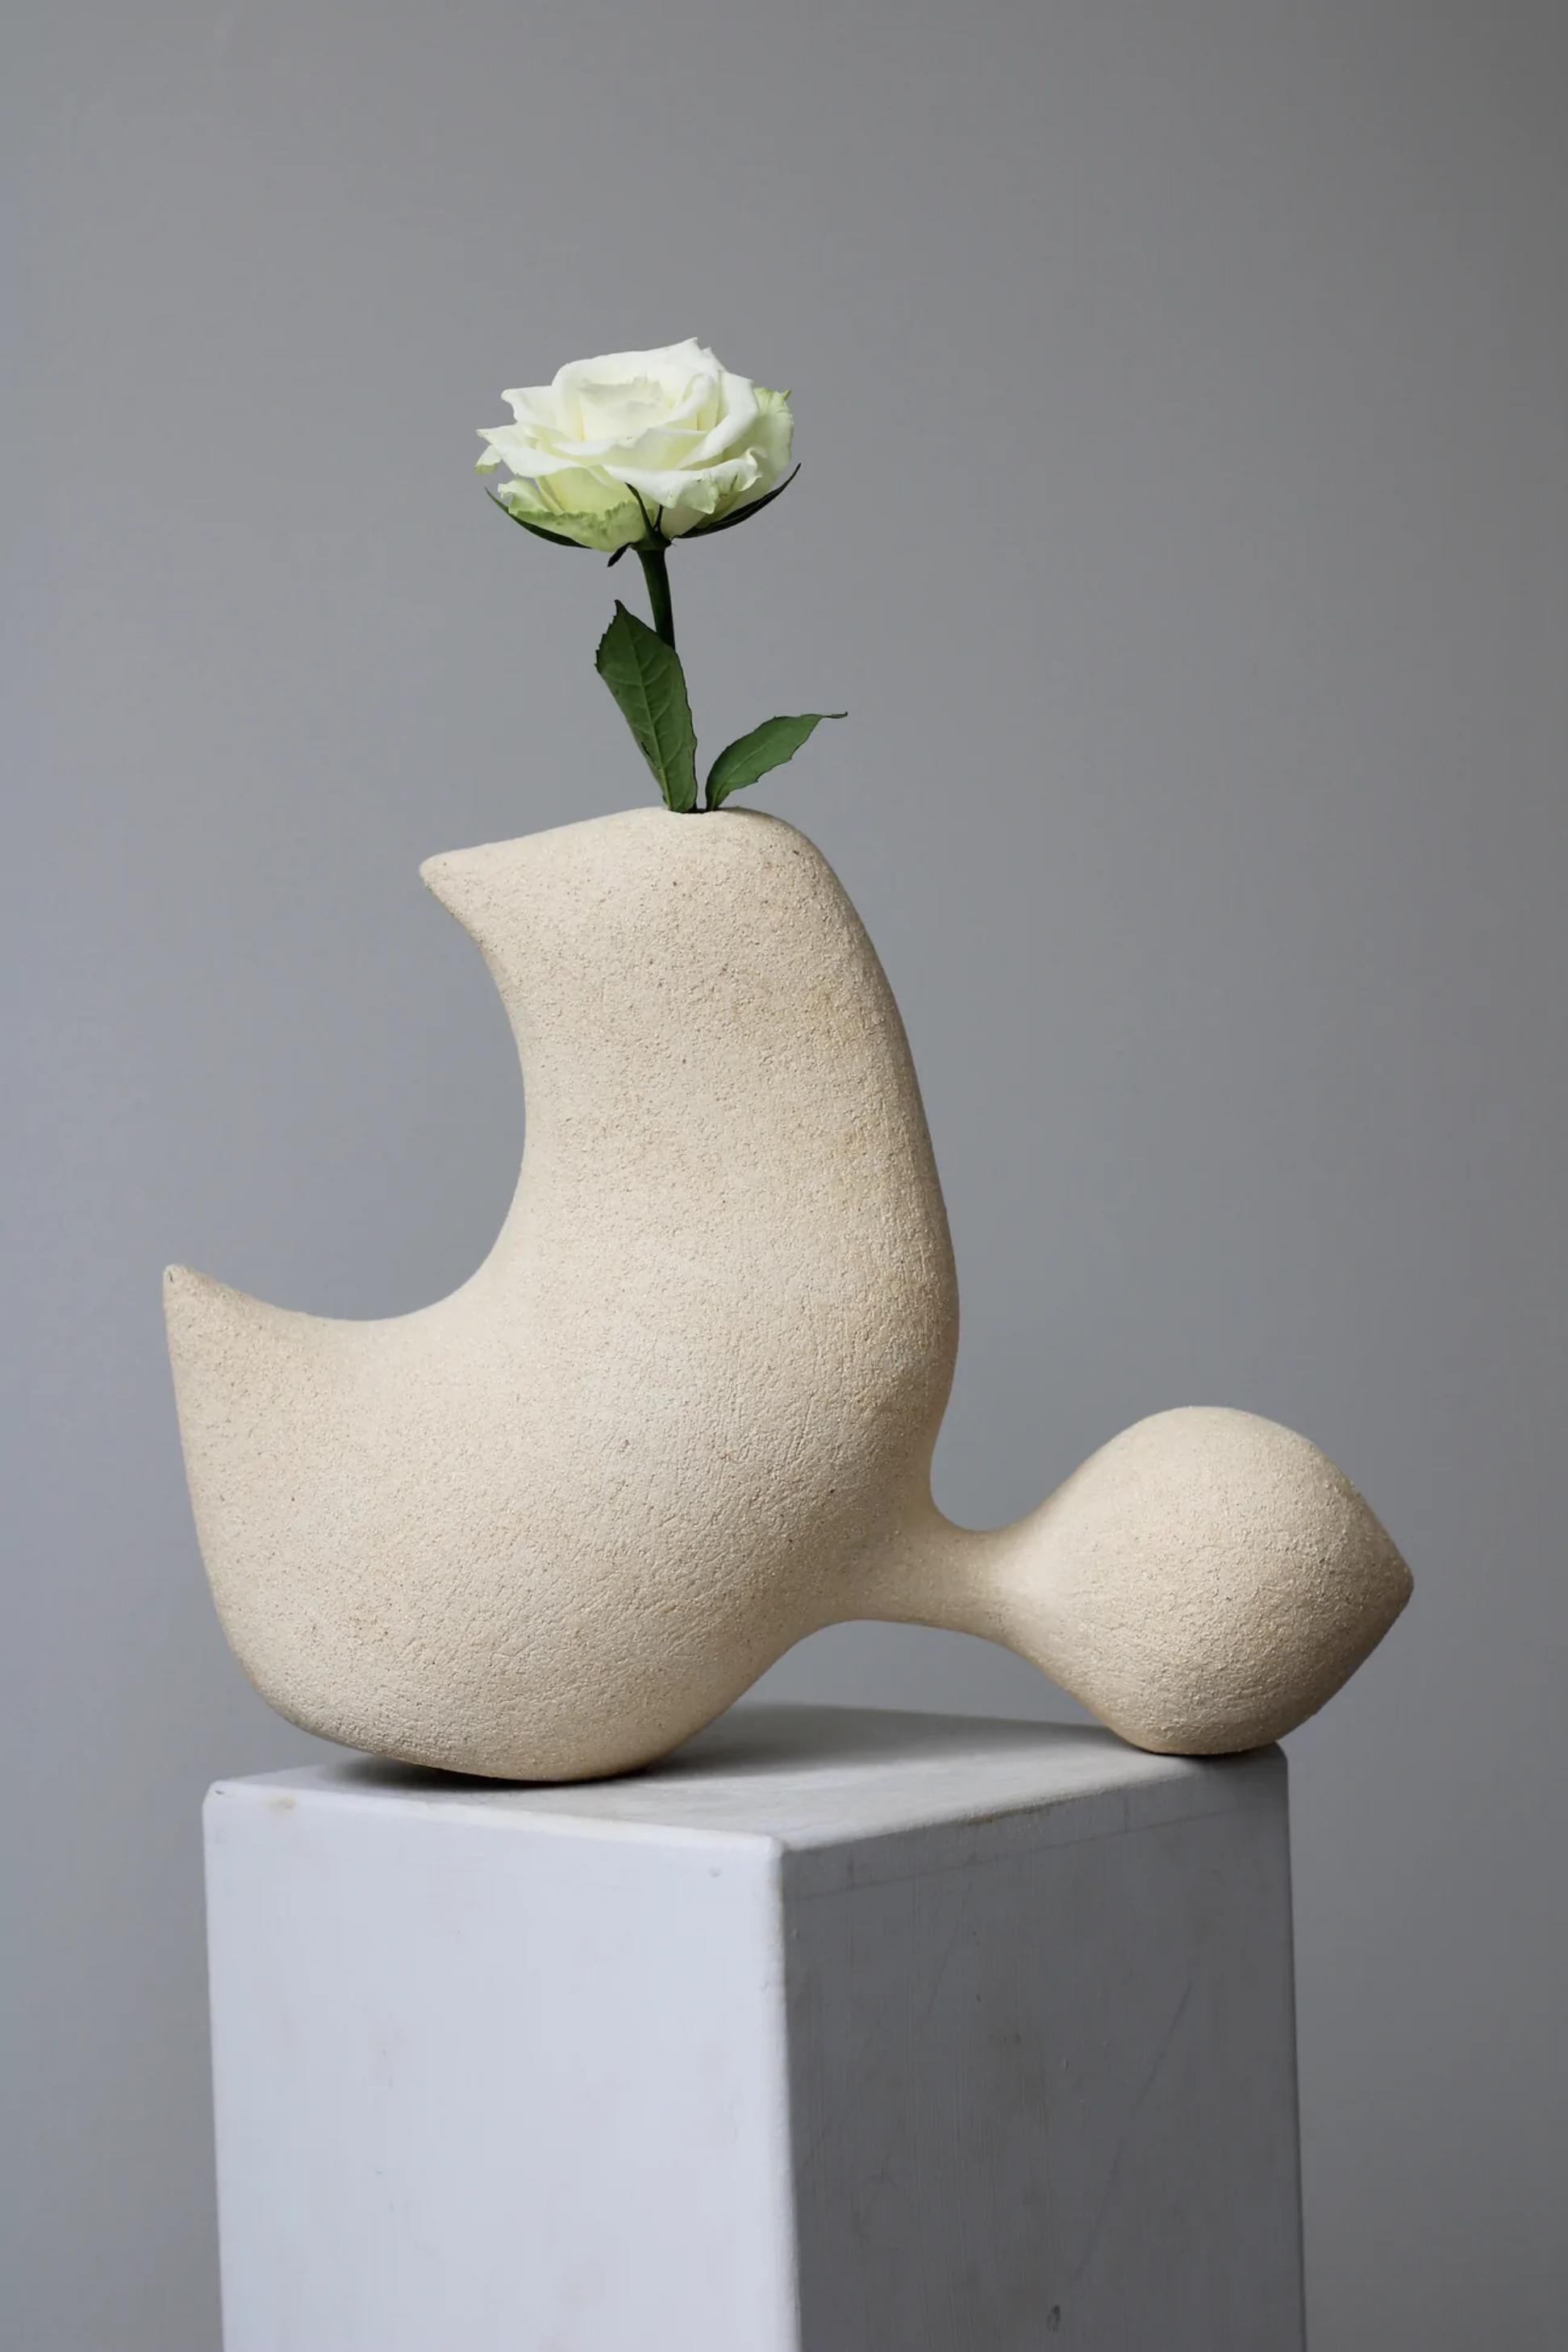 Large 2nd Generation Pleomorph 30 sculpture by Abid Javed
Dimensions: W 65 x D 10 x 50 cm (Dimensions are variable)
Materials: Ceramic stoneware.
Available in multiple clay body and size options.

Ceramic stoneware vessel. Clear-glazed